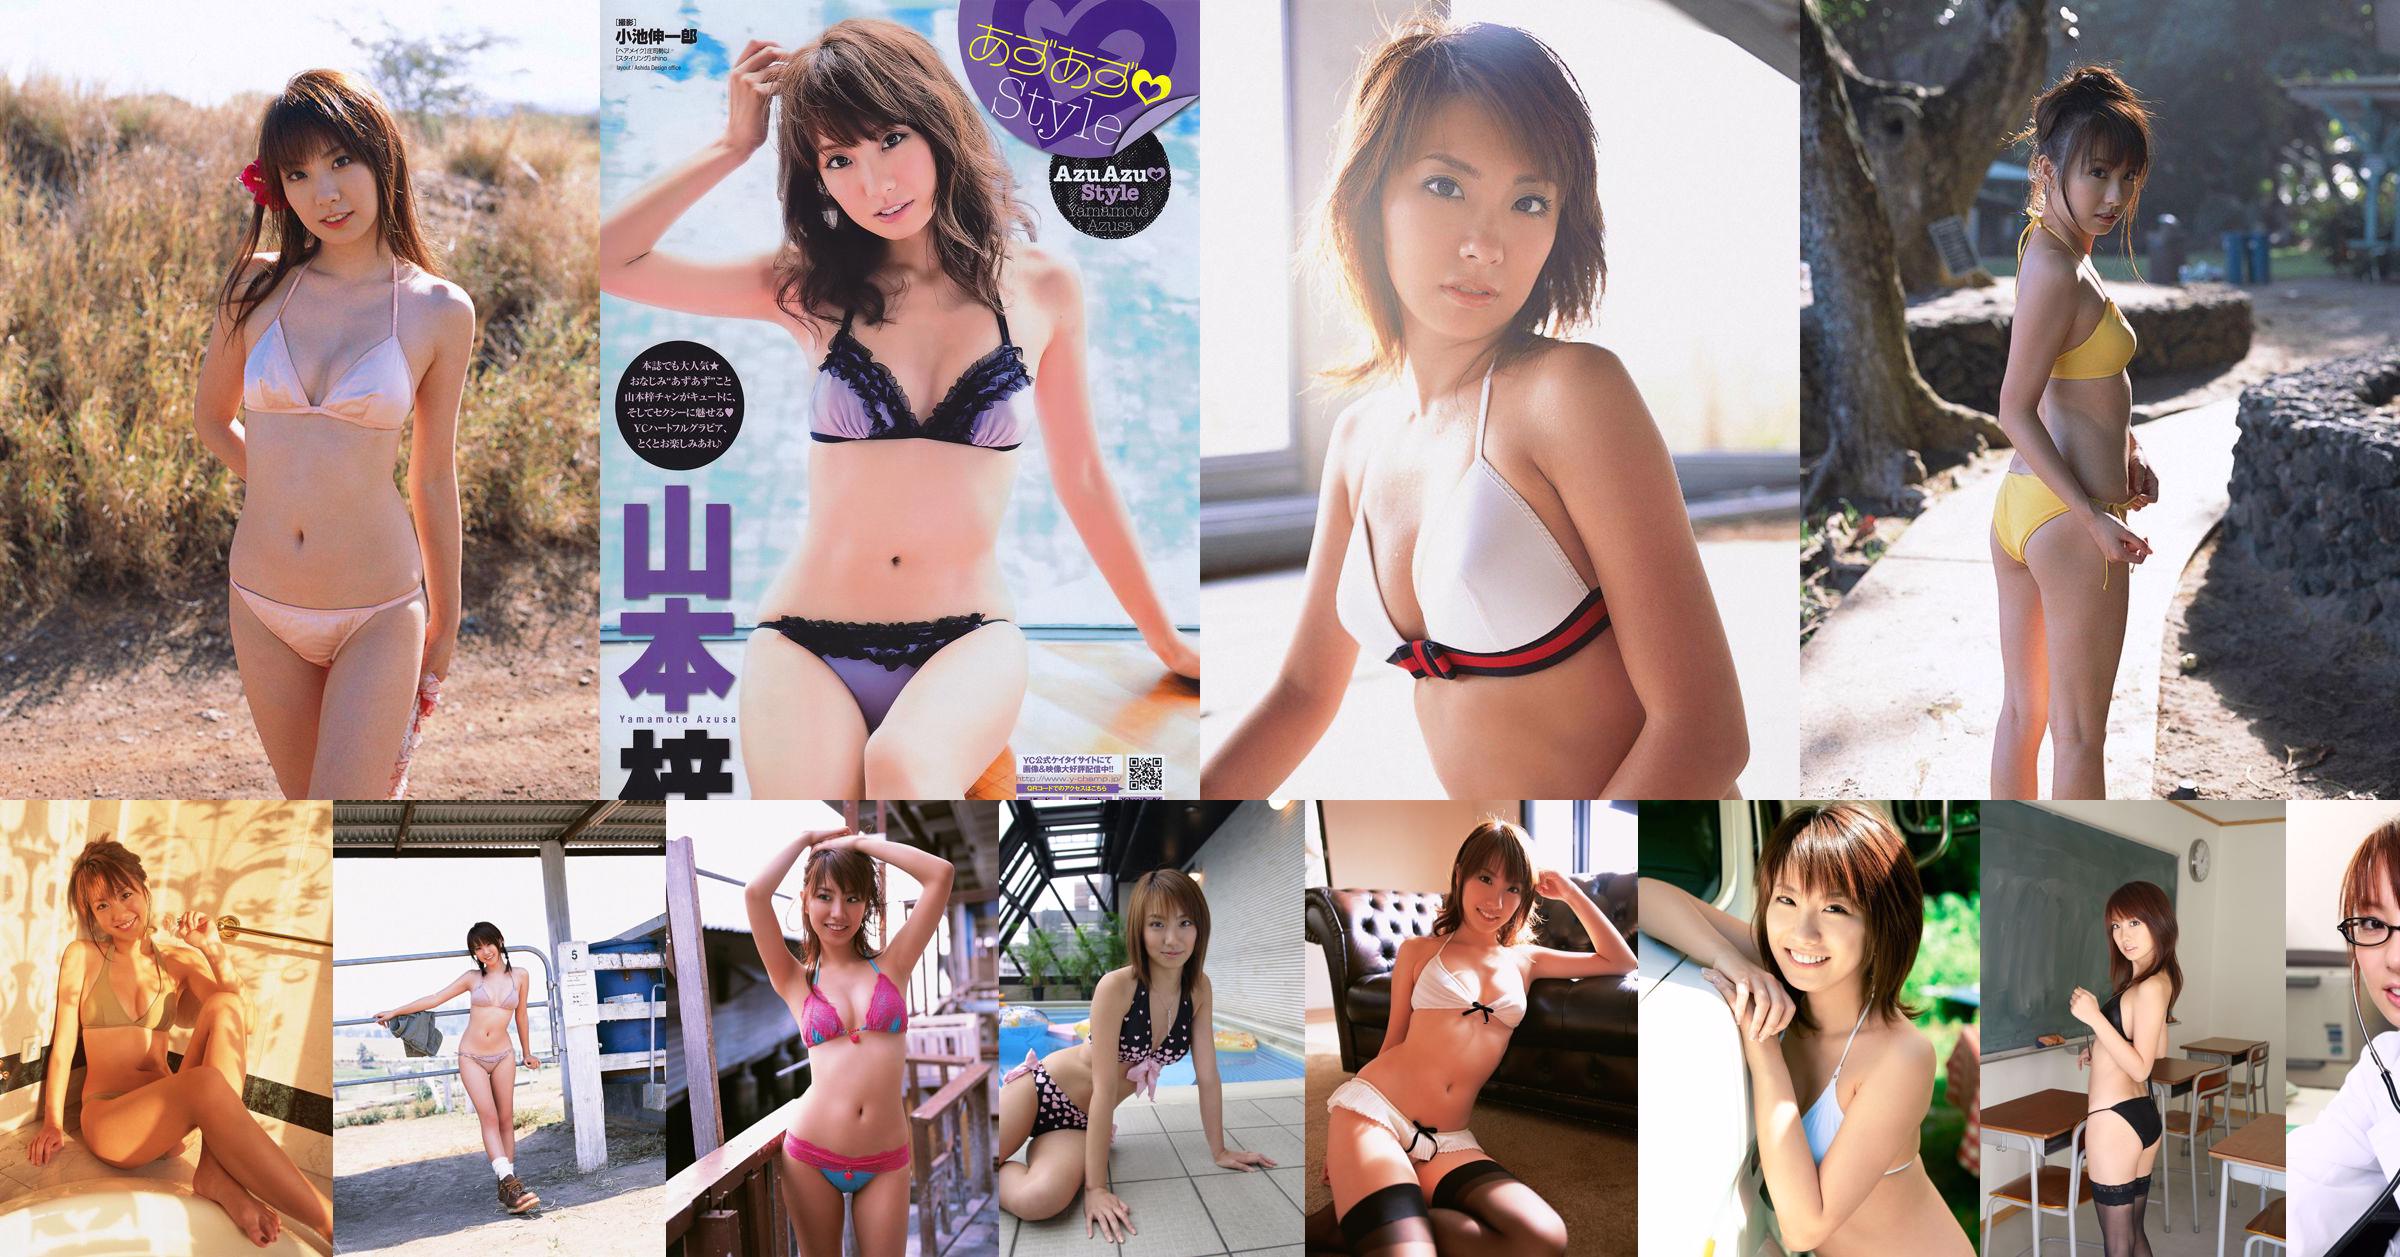 Azusa Yamamoto "Just the way you are" [Image.tv] No.0f5499 Page 1